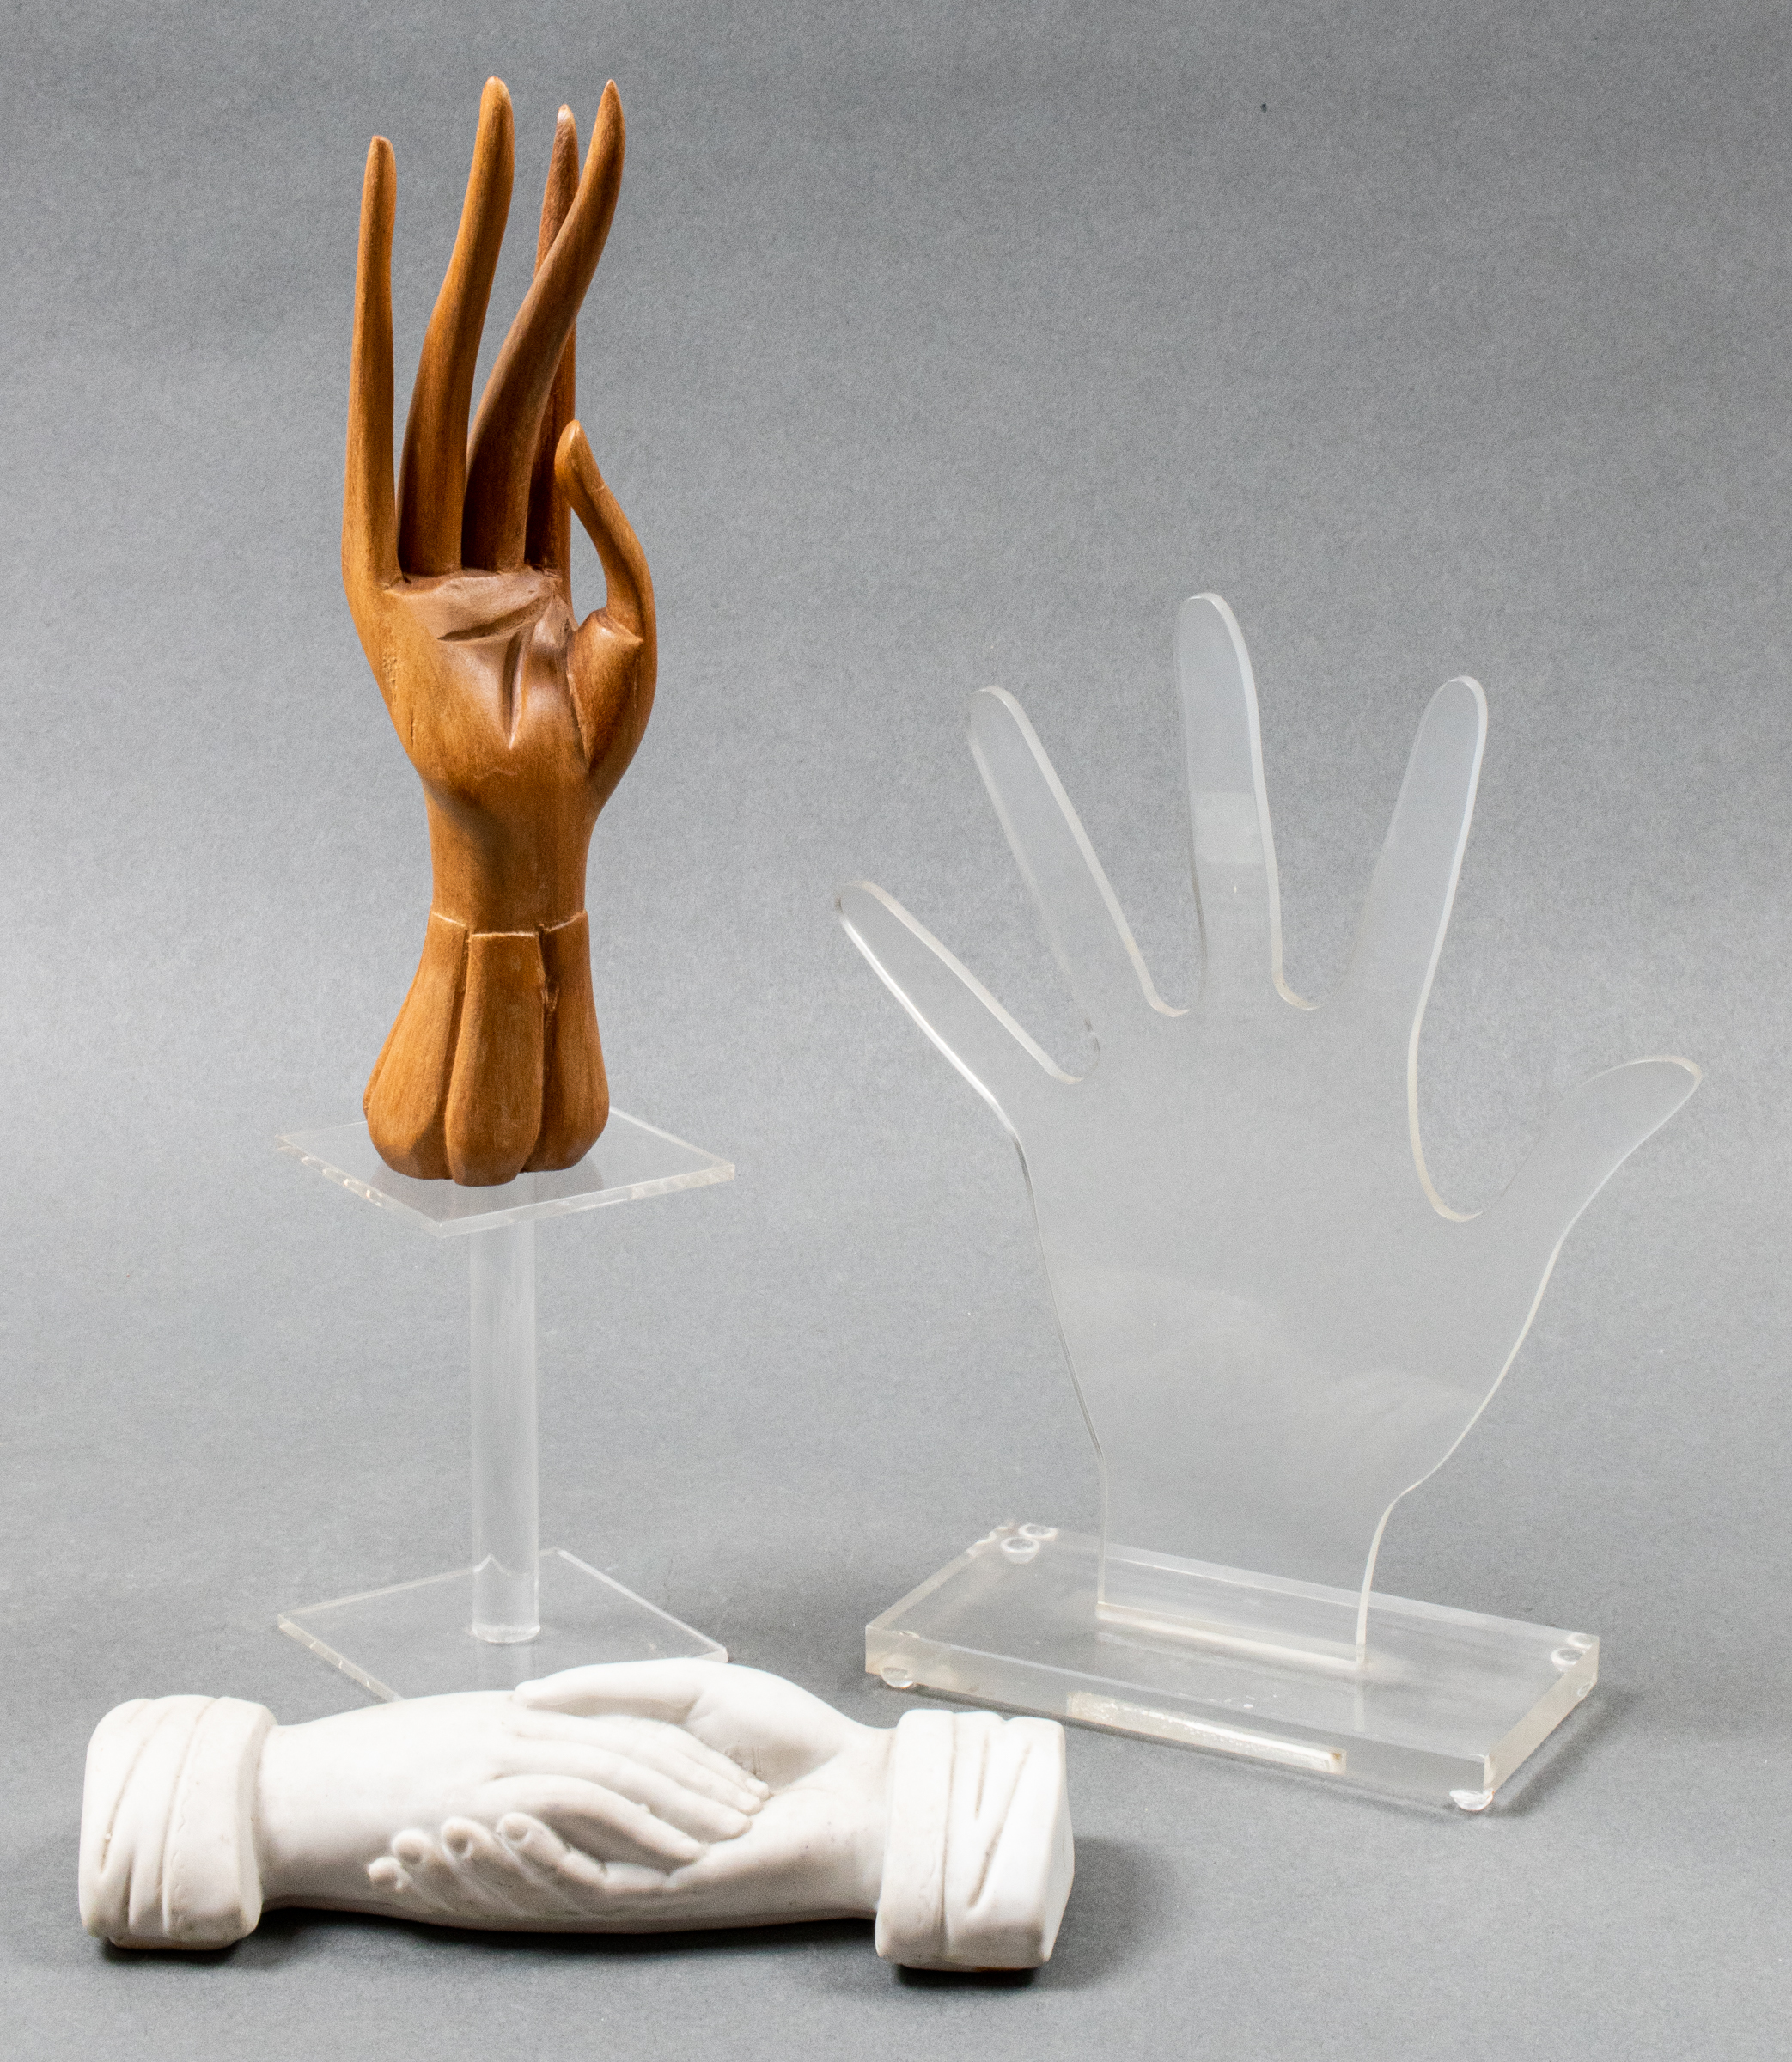 COLLECTION OF HAND SCULPTURES,